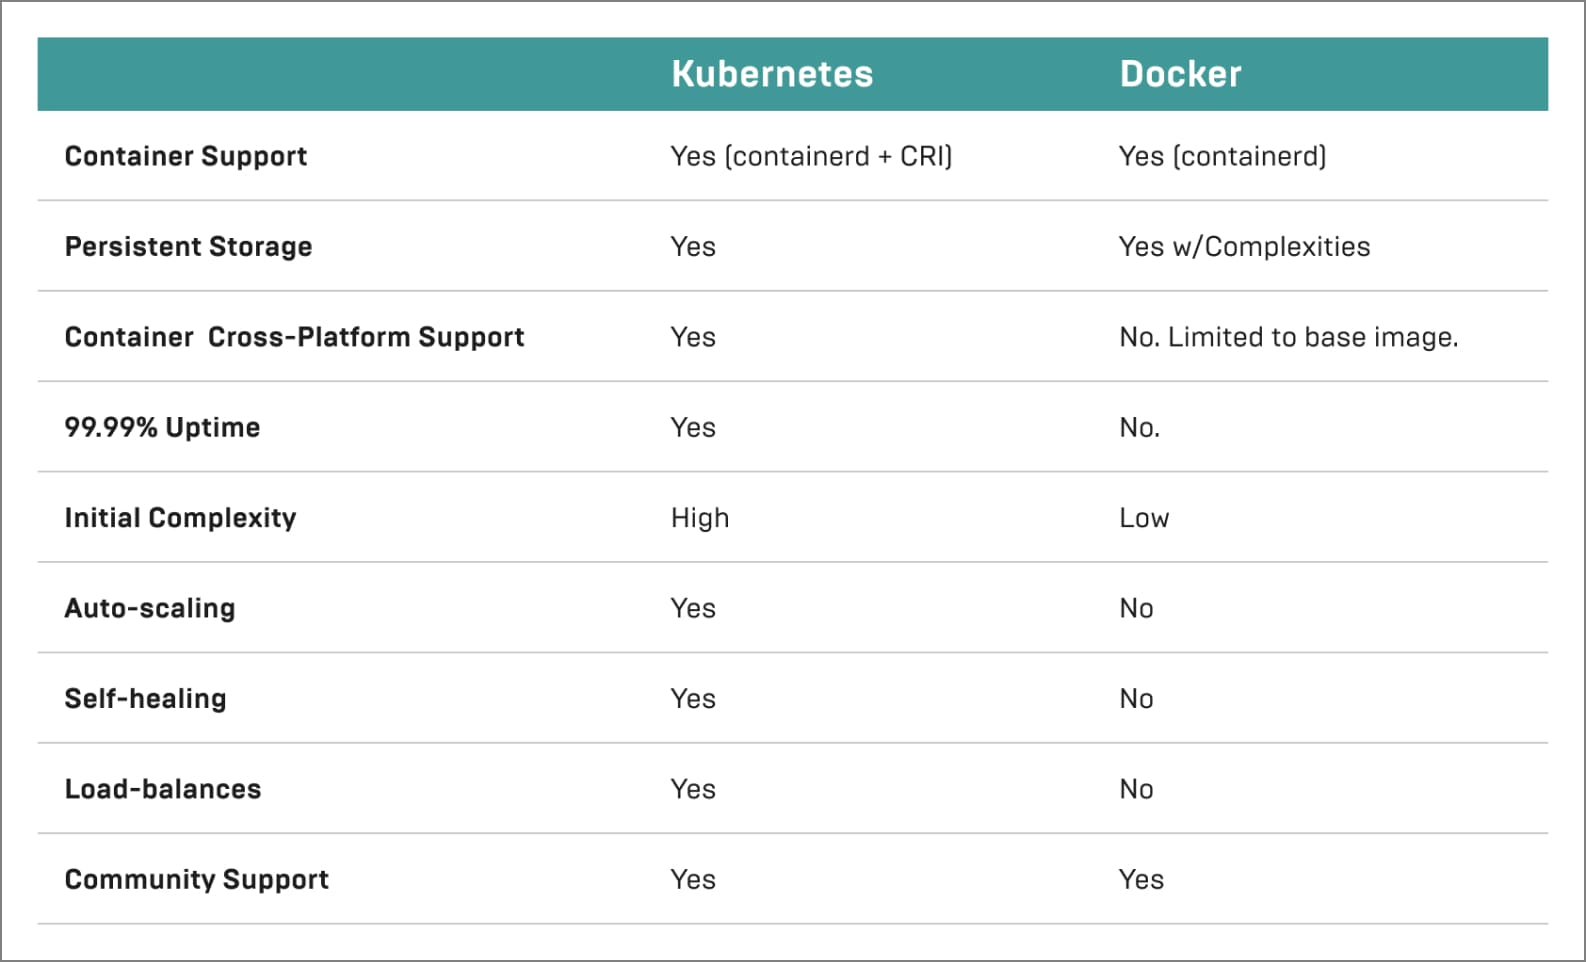 What is the difference between Kubernetes and Docker?